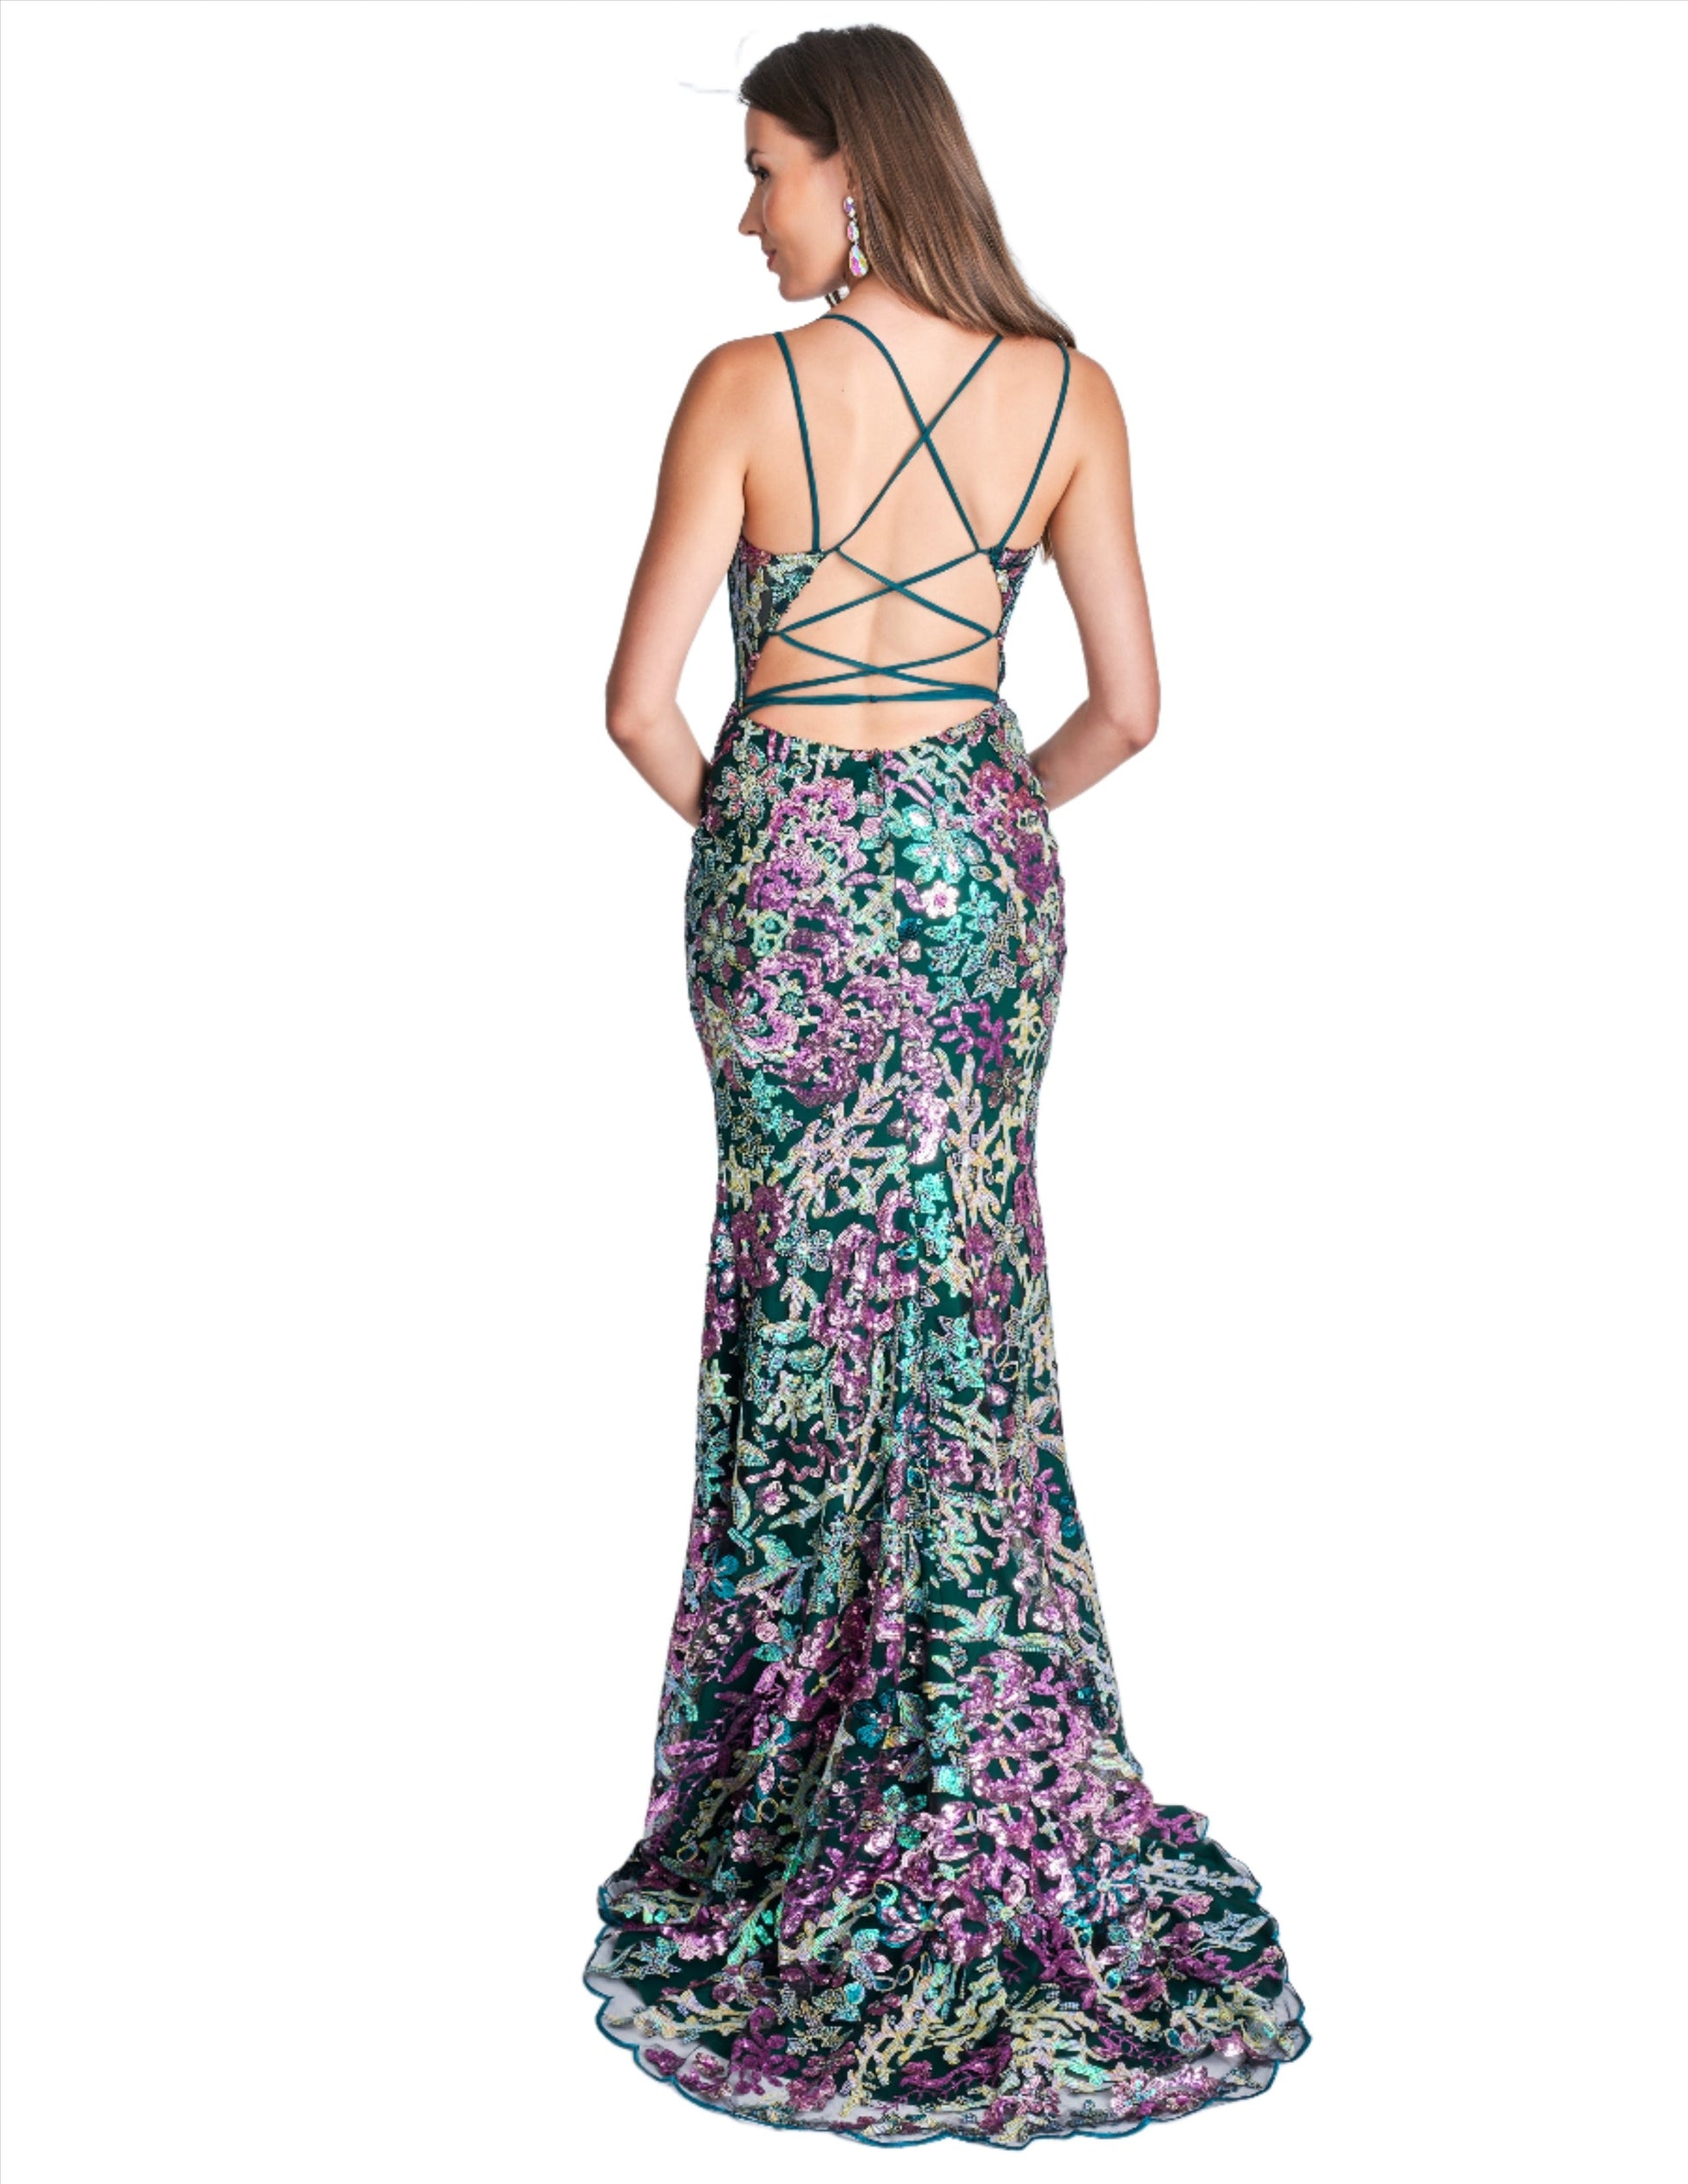 This Nina Canacci 2391 prom dress is both elegant and eye-catching. The sheer corset and floral backless design add a touch of glamour, while the sequin print and thigh-high slit offer a bold and stylish look. Perfect for formal evenings and proms, this gown is sure to turn heads and make a statement.